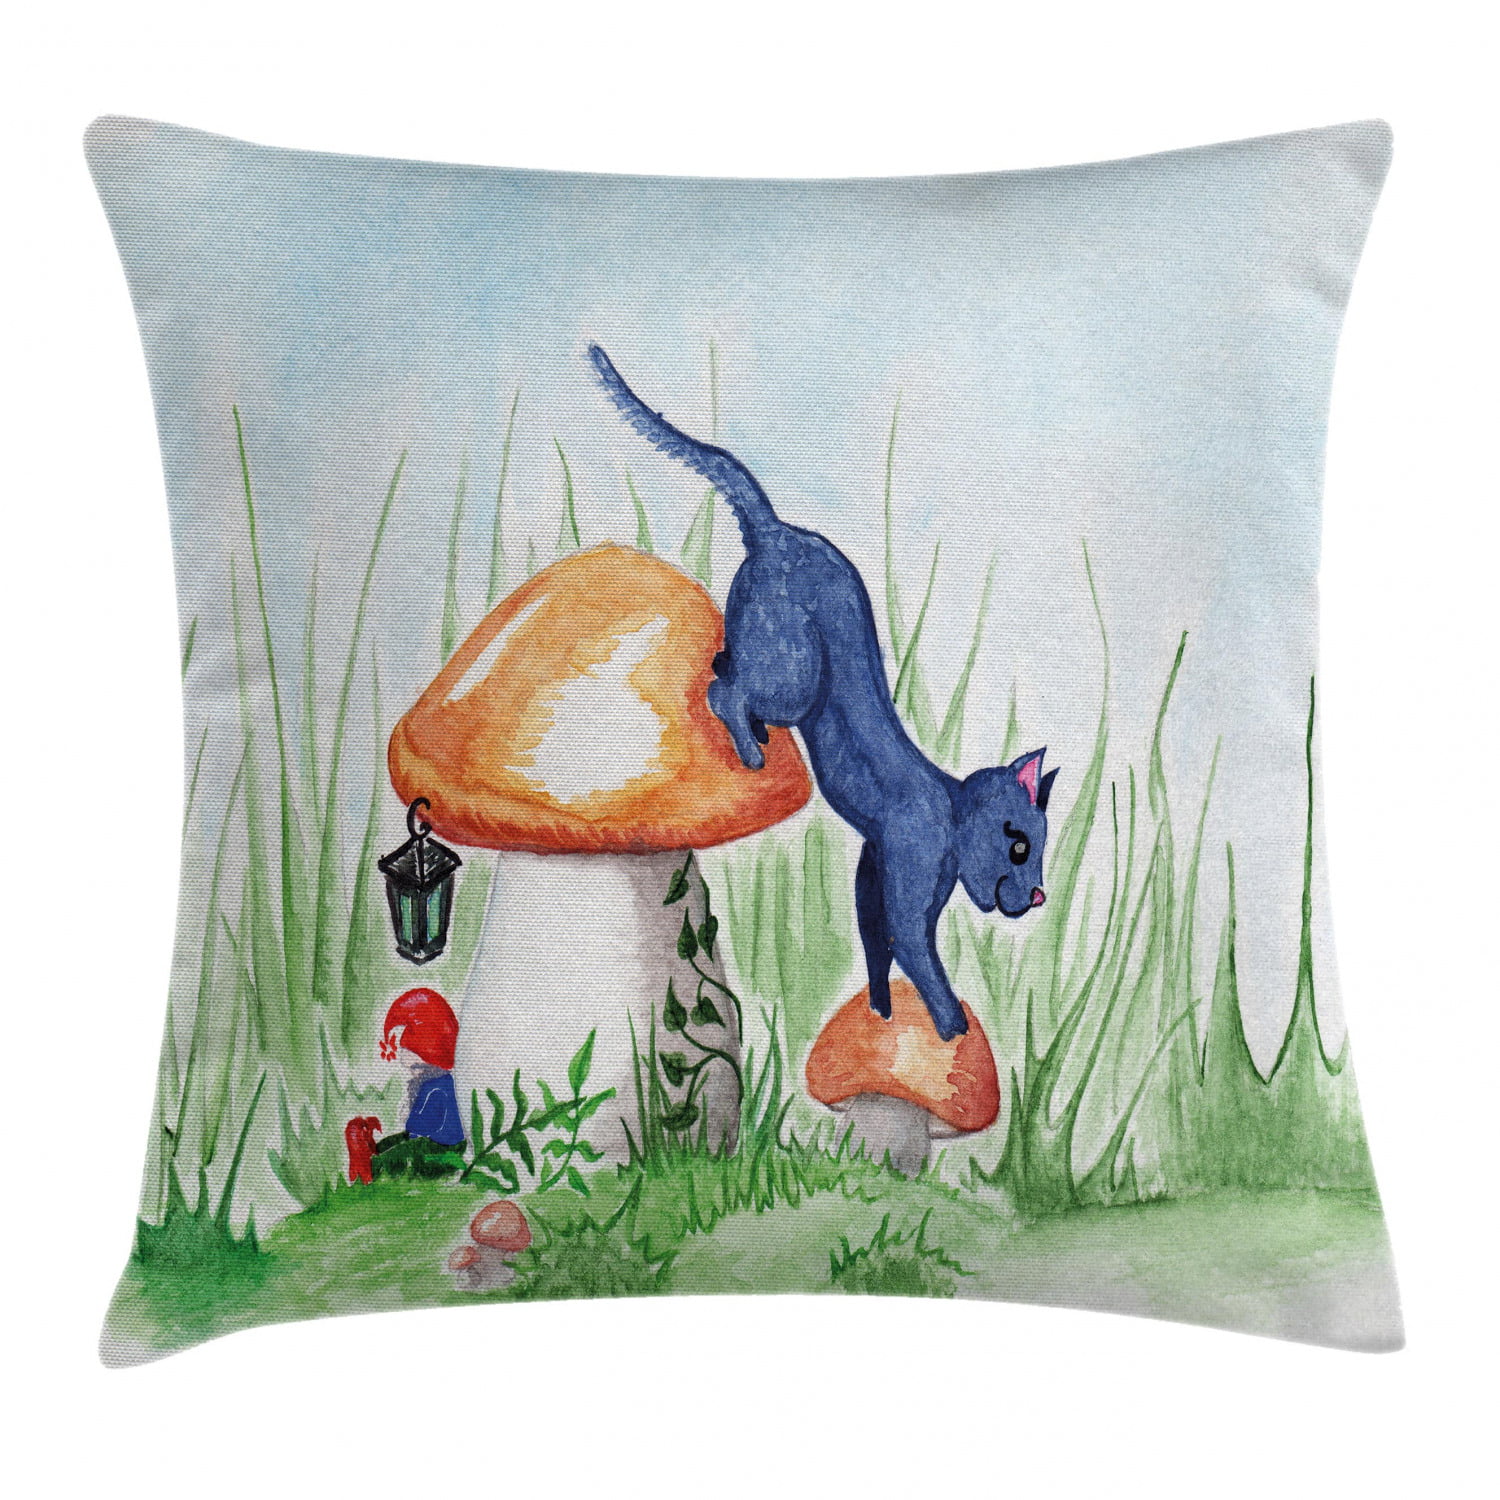 Mushroom Throw Pillow Cases Cushion Covers by Ambesonne Home Decor 8 Sizes